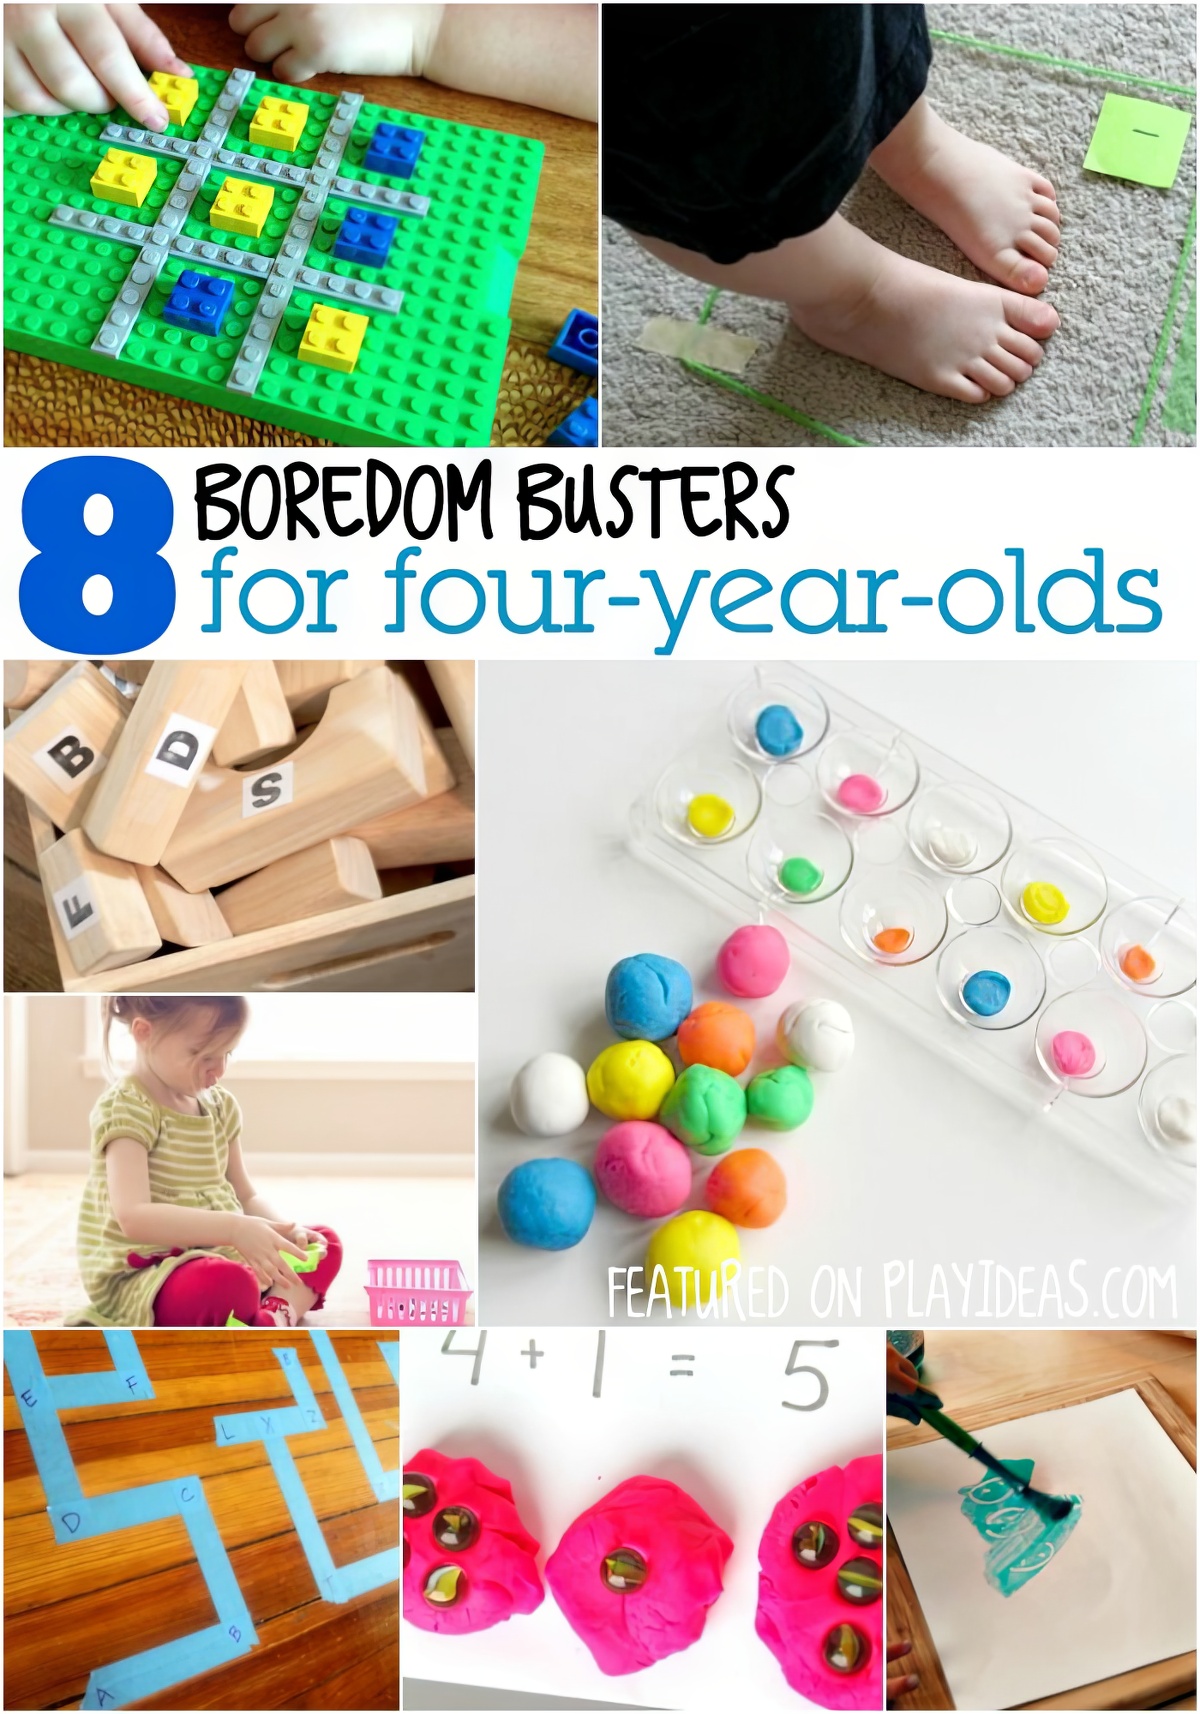 8 boredom busters for four year olds, 4-year-old boredom buster activities